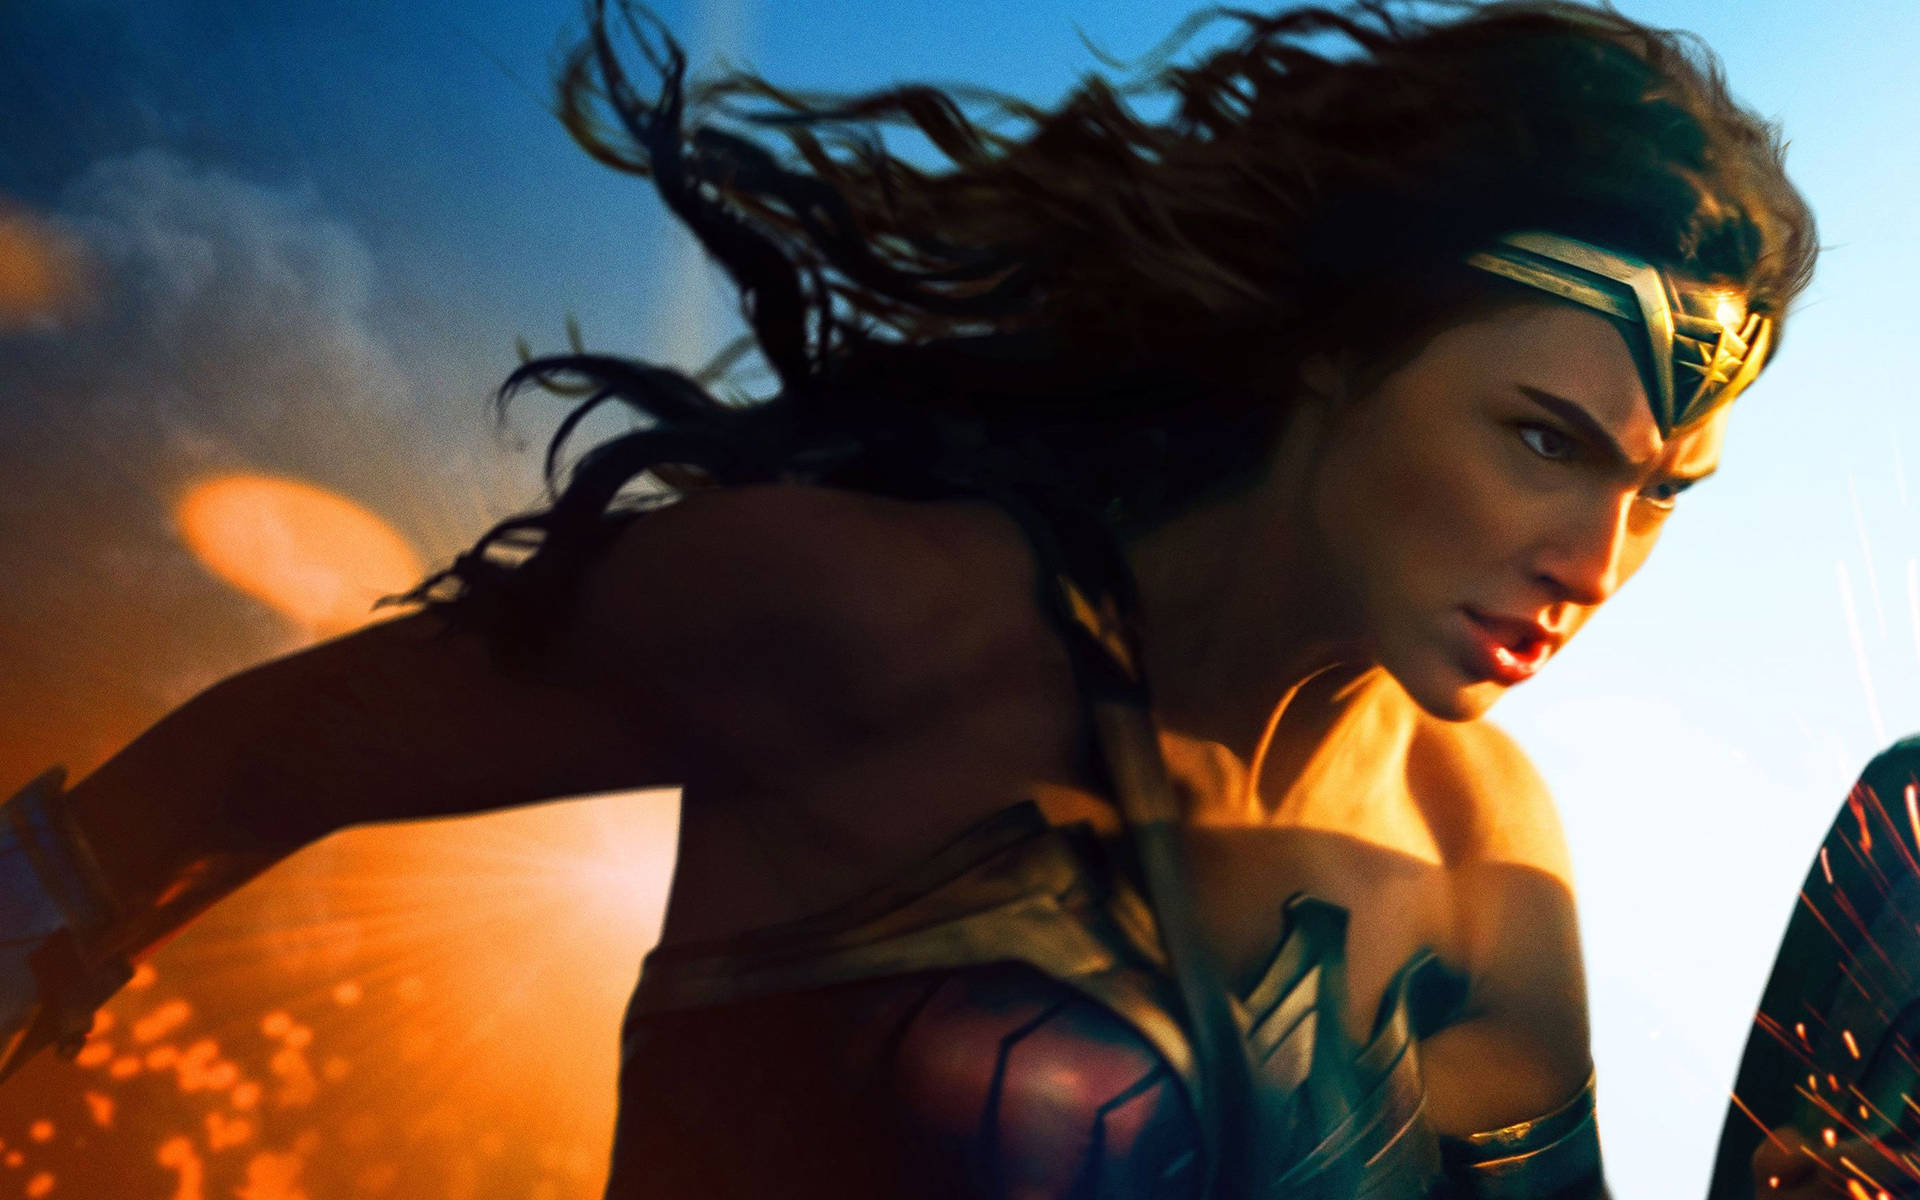 2880X1800 Wonder Woman Wallpaper and Background